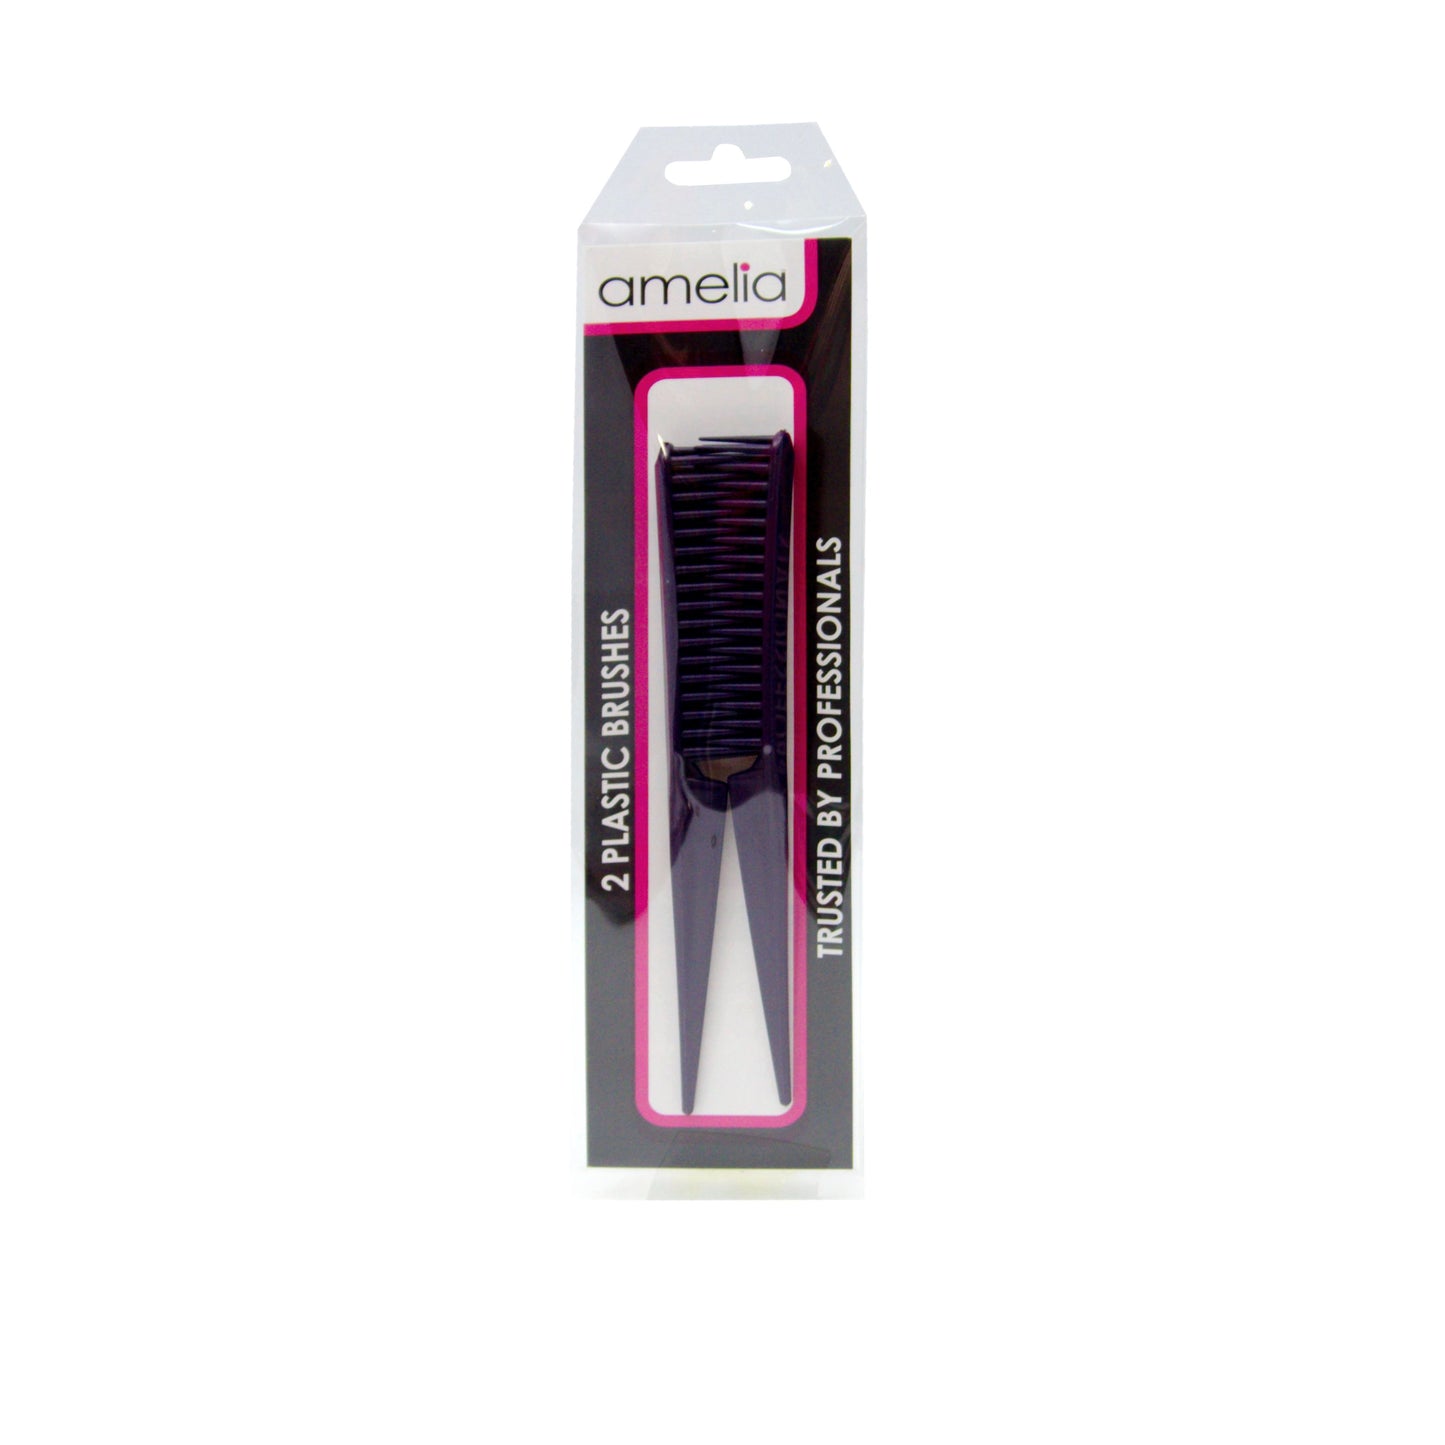 Amelia Beauty, 7in, 3 Row Styling Comb For Detangling, Tease, Defining And Separating Curls - Purple